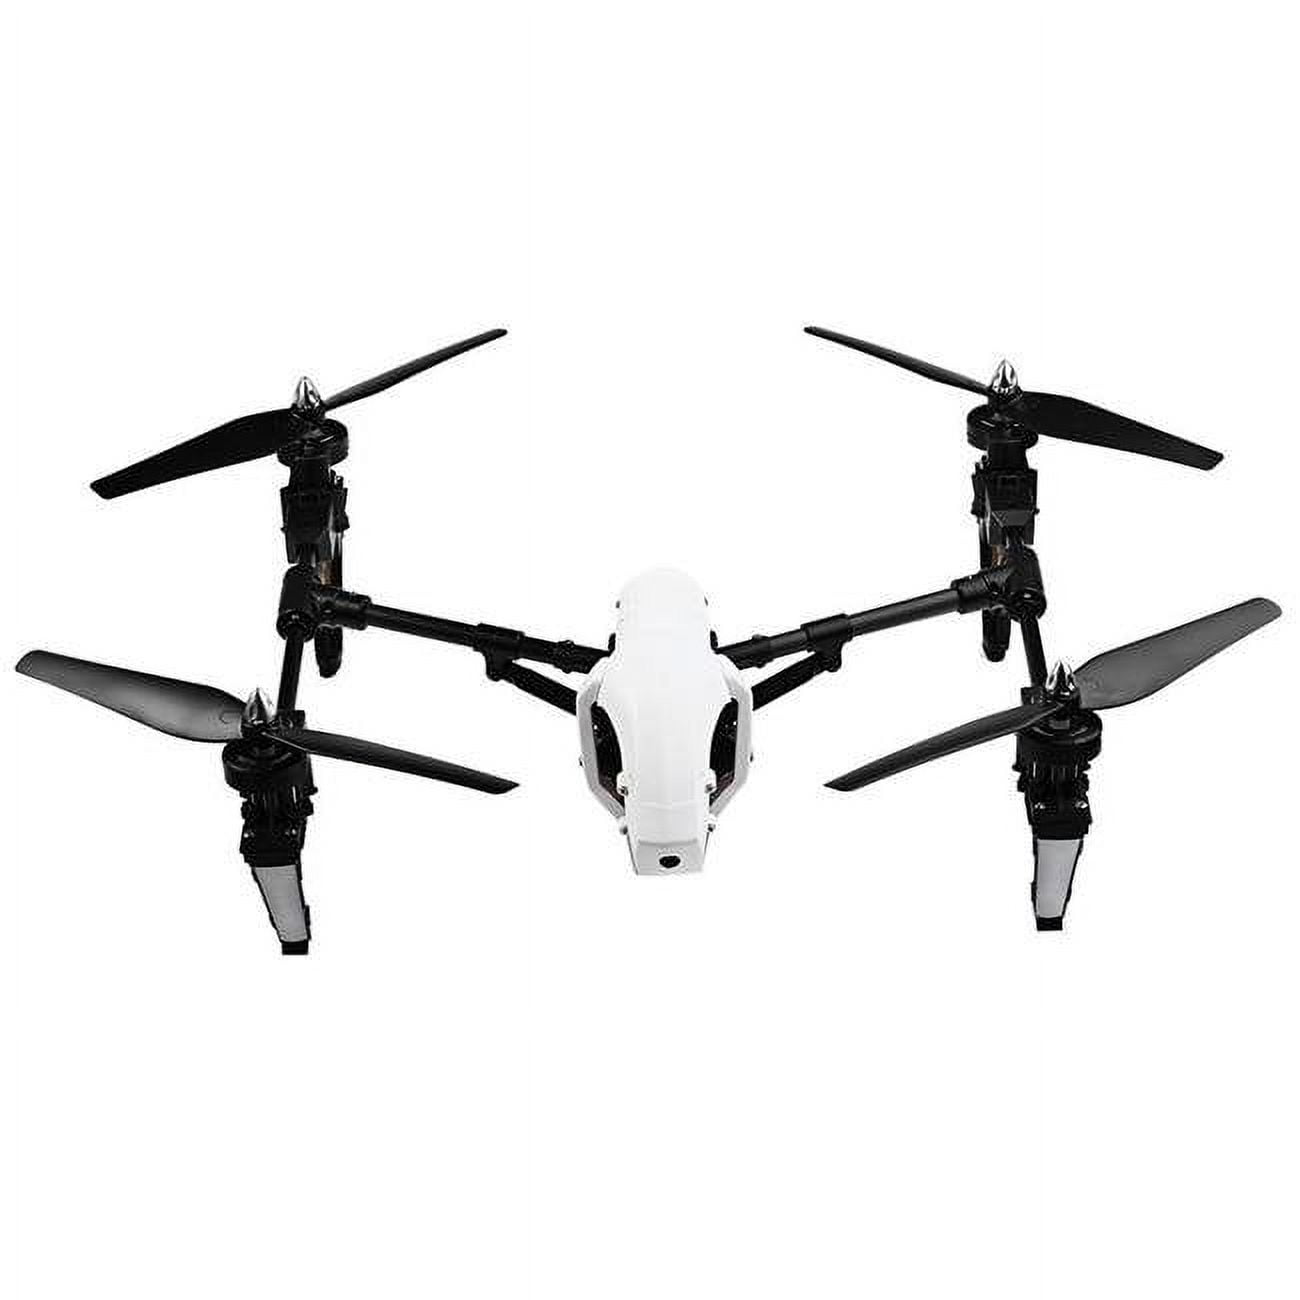 Picture of Azimport Q333-B 2.4 Ghz & 4CH 6 Axis Gyro Wi-Fi FPV RC Quadcopter RTF - White